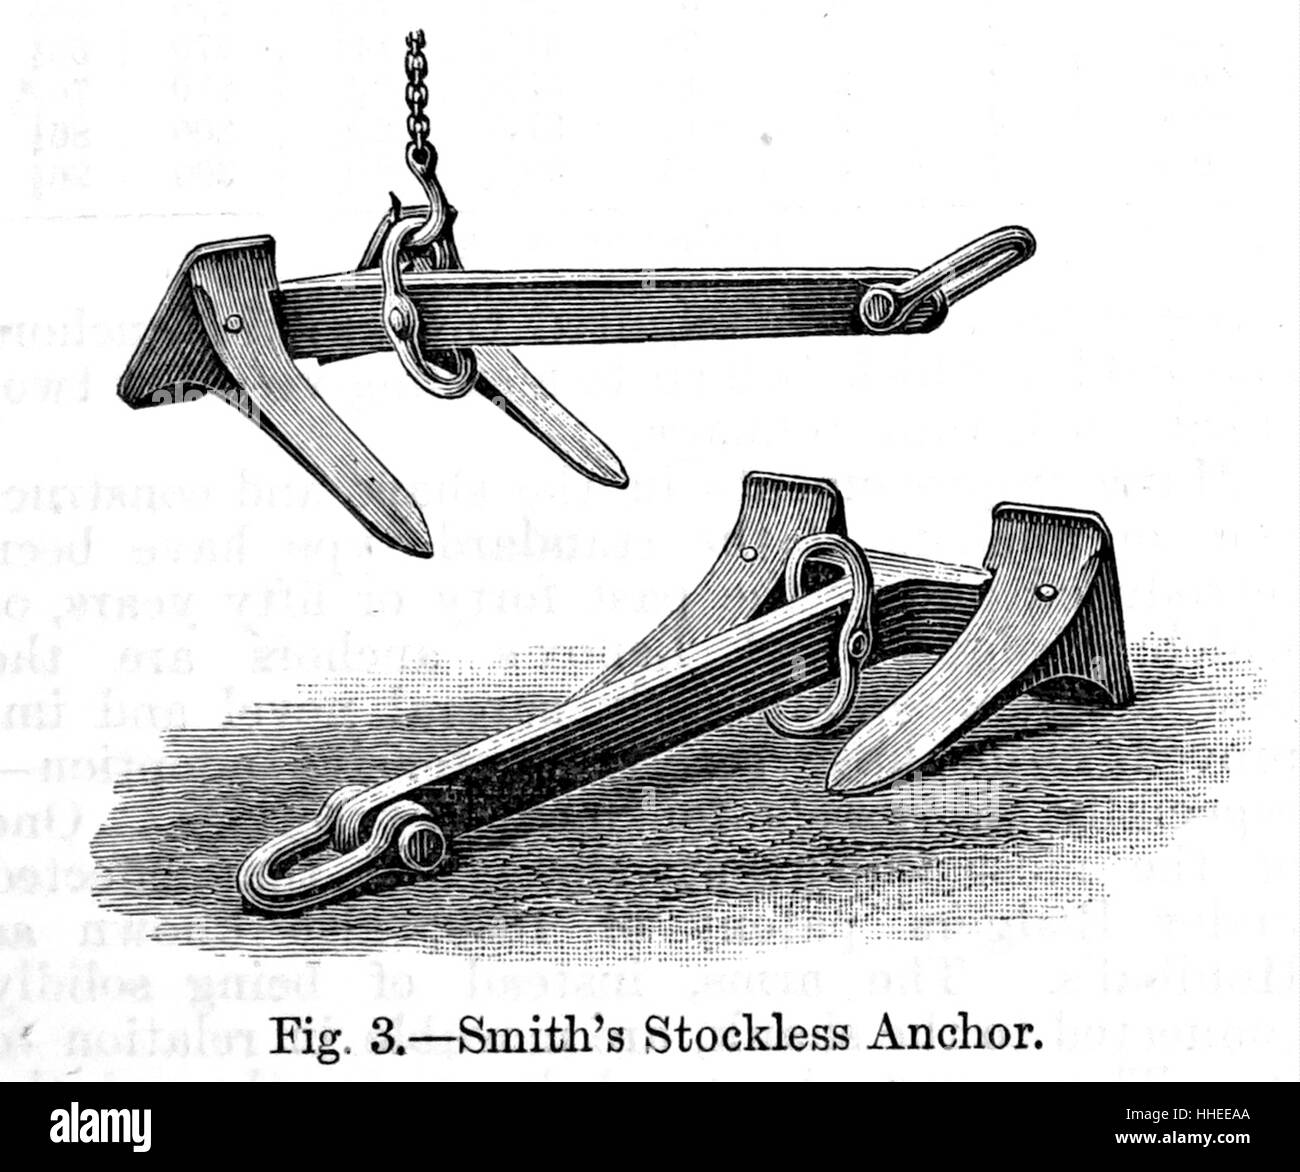 Engraving of a Smith's Stockless anchor, a device used to connect a vessel  to the bed